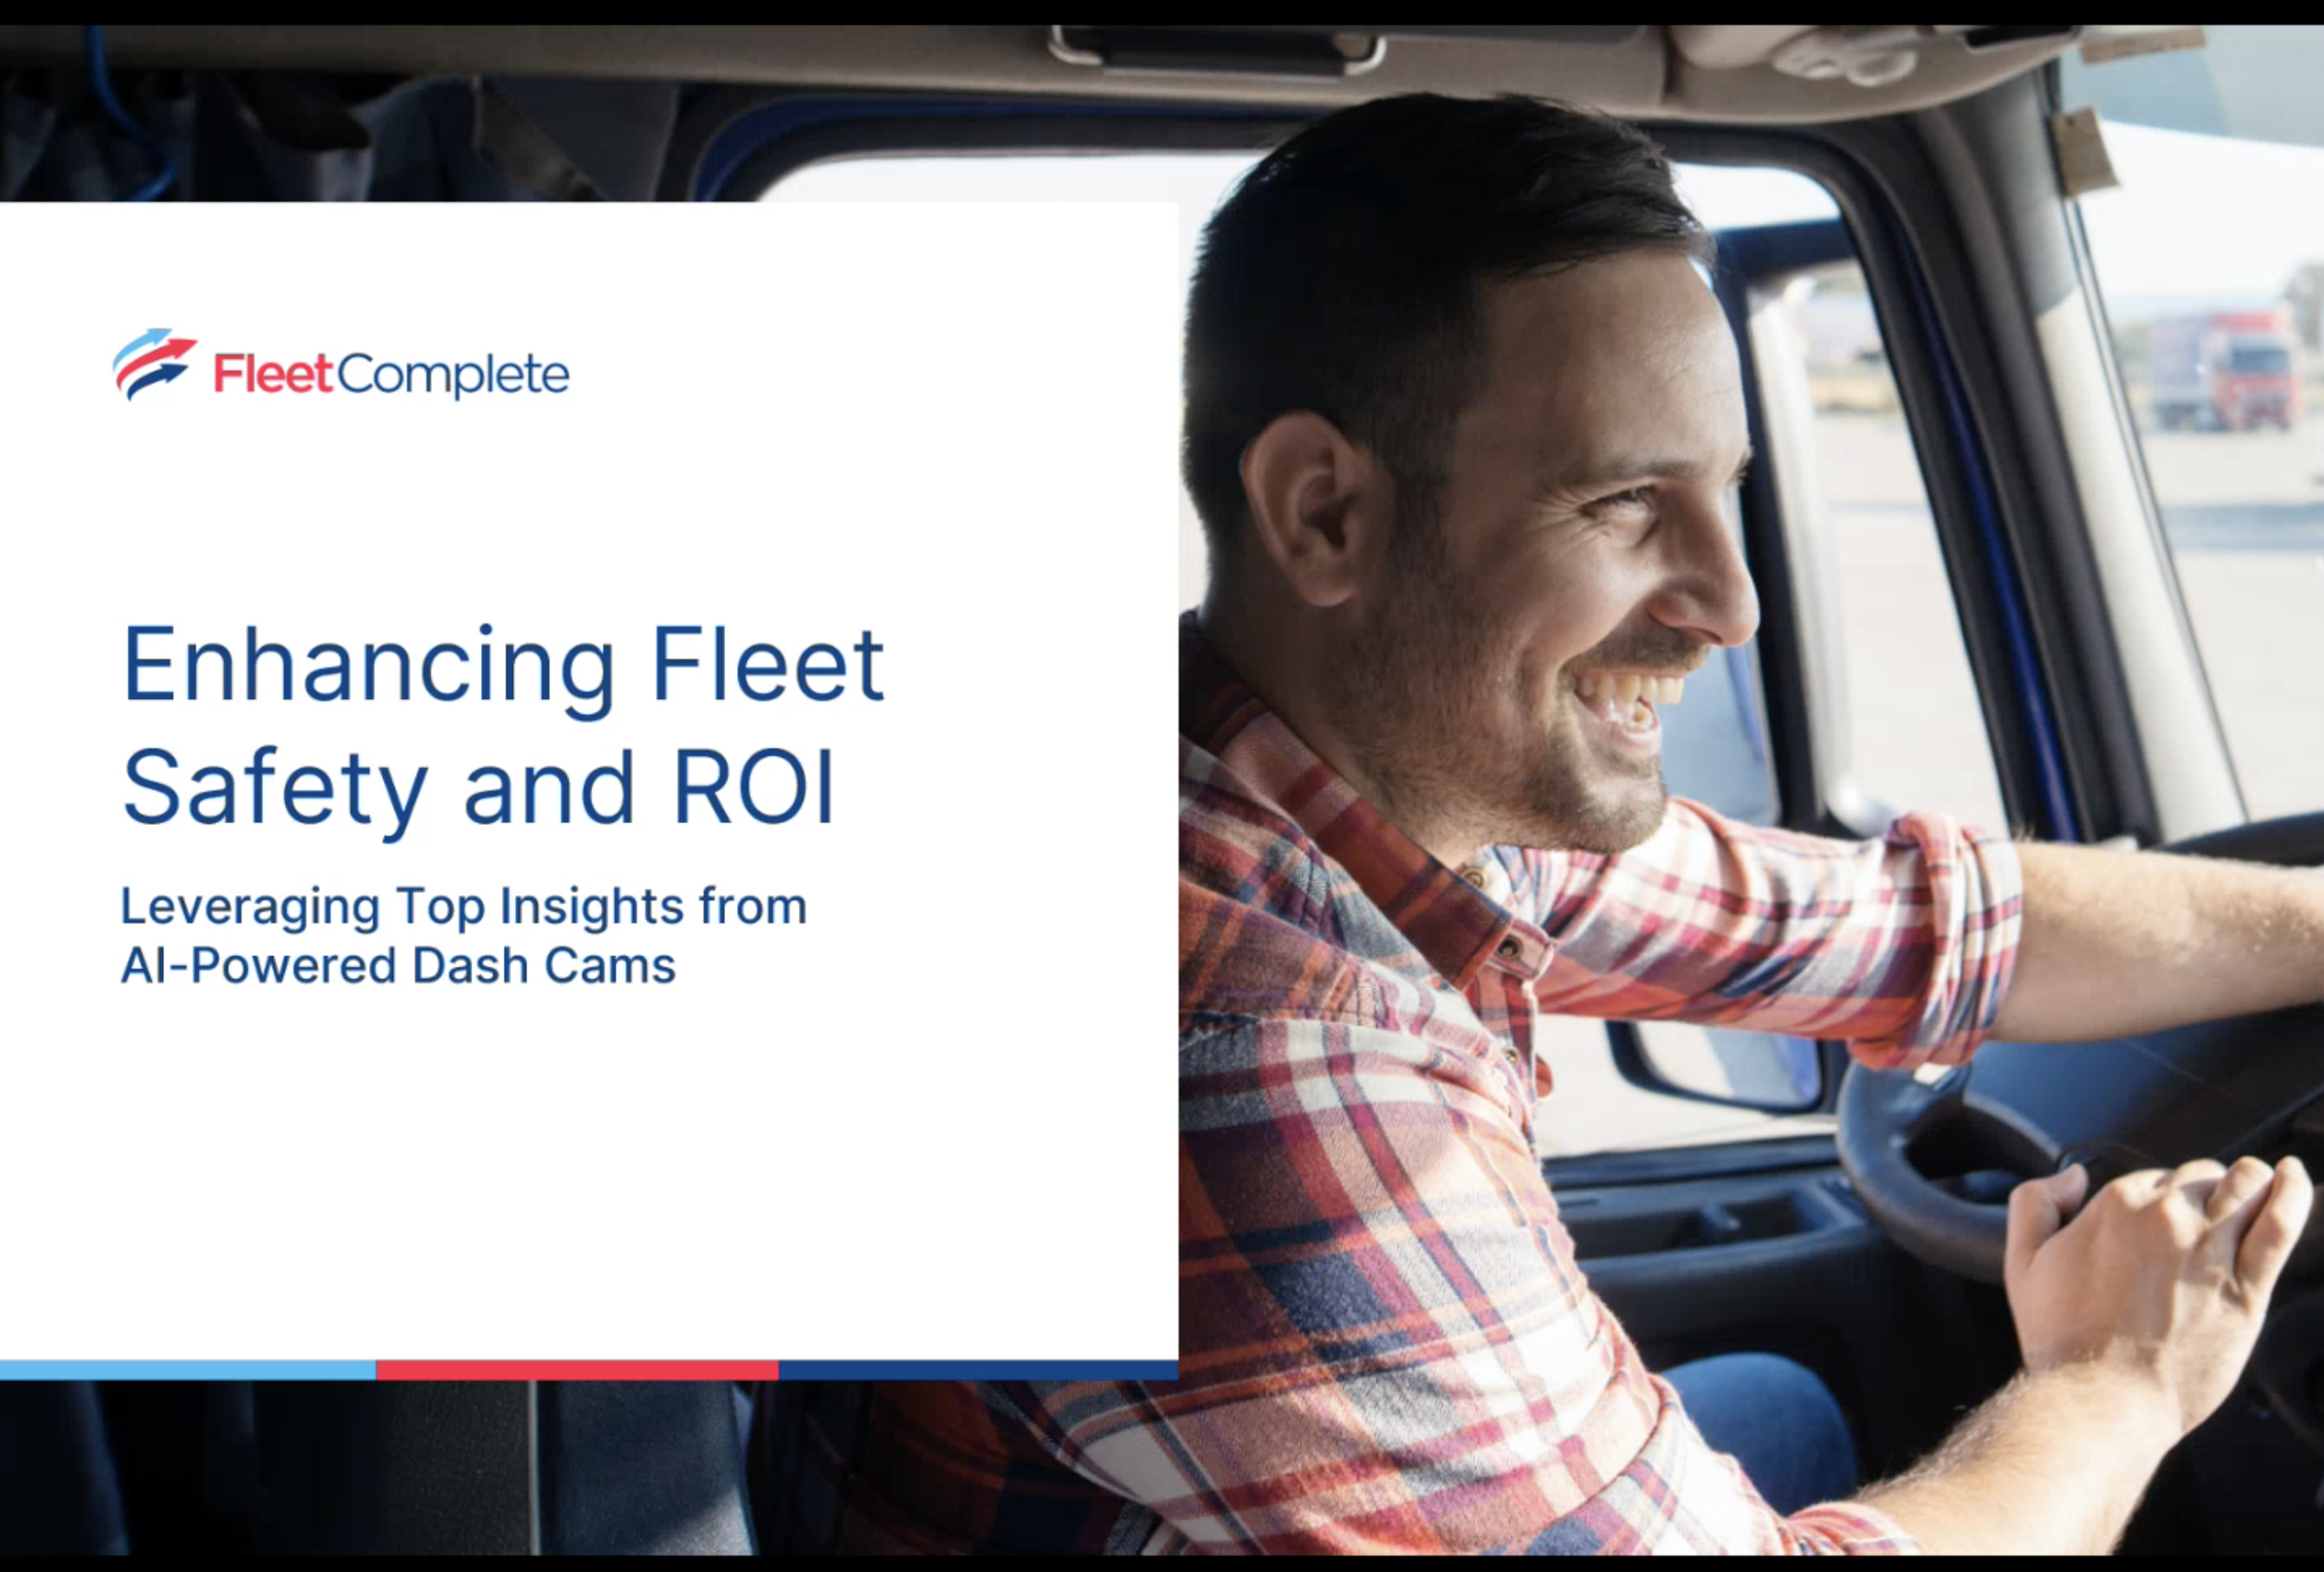 Enhance Your Fleet Safety and ROI with Top Insights from AI-Powered Dash Cams - english 